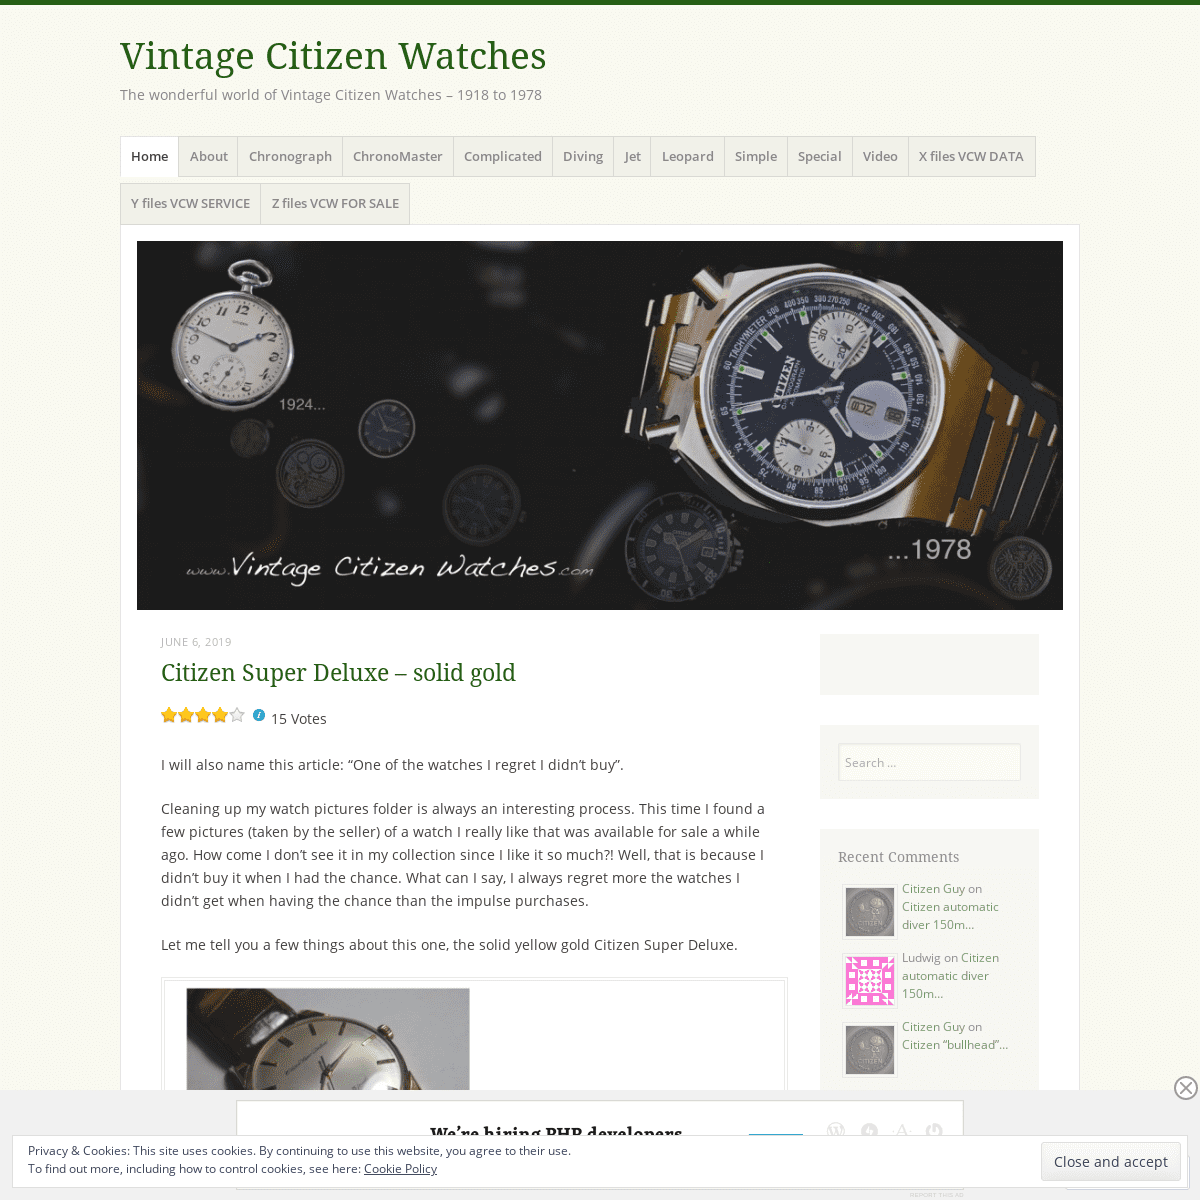 A complete backup of vintagecitizenwatches.com